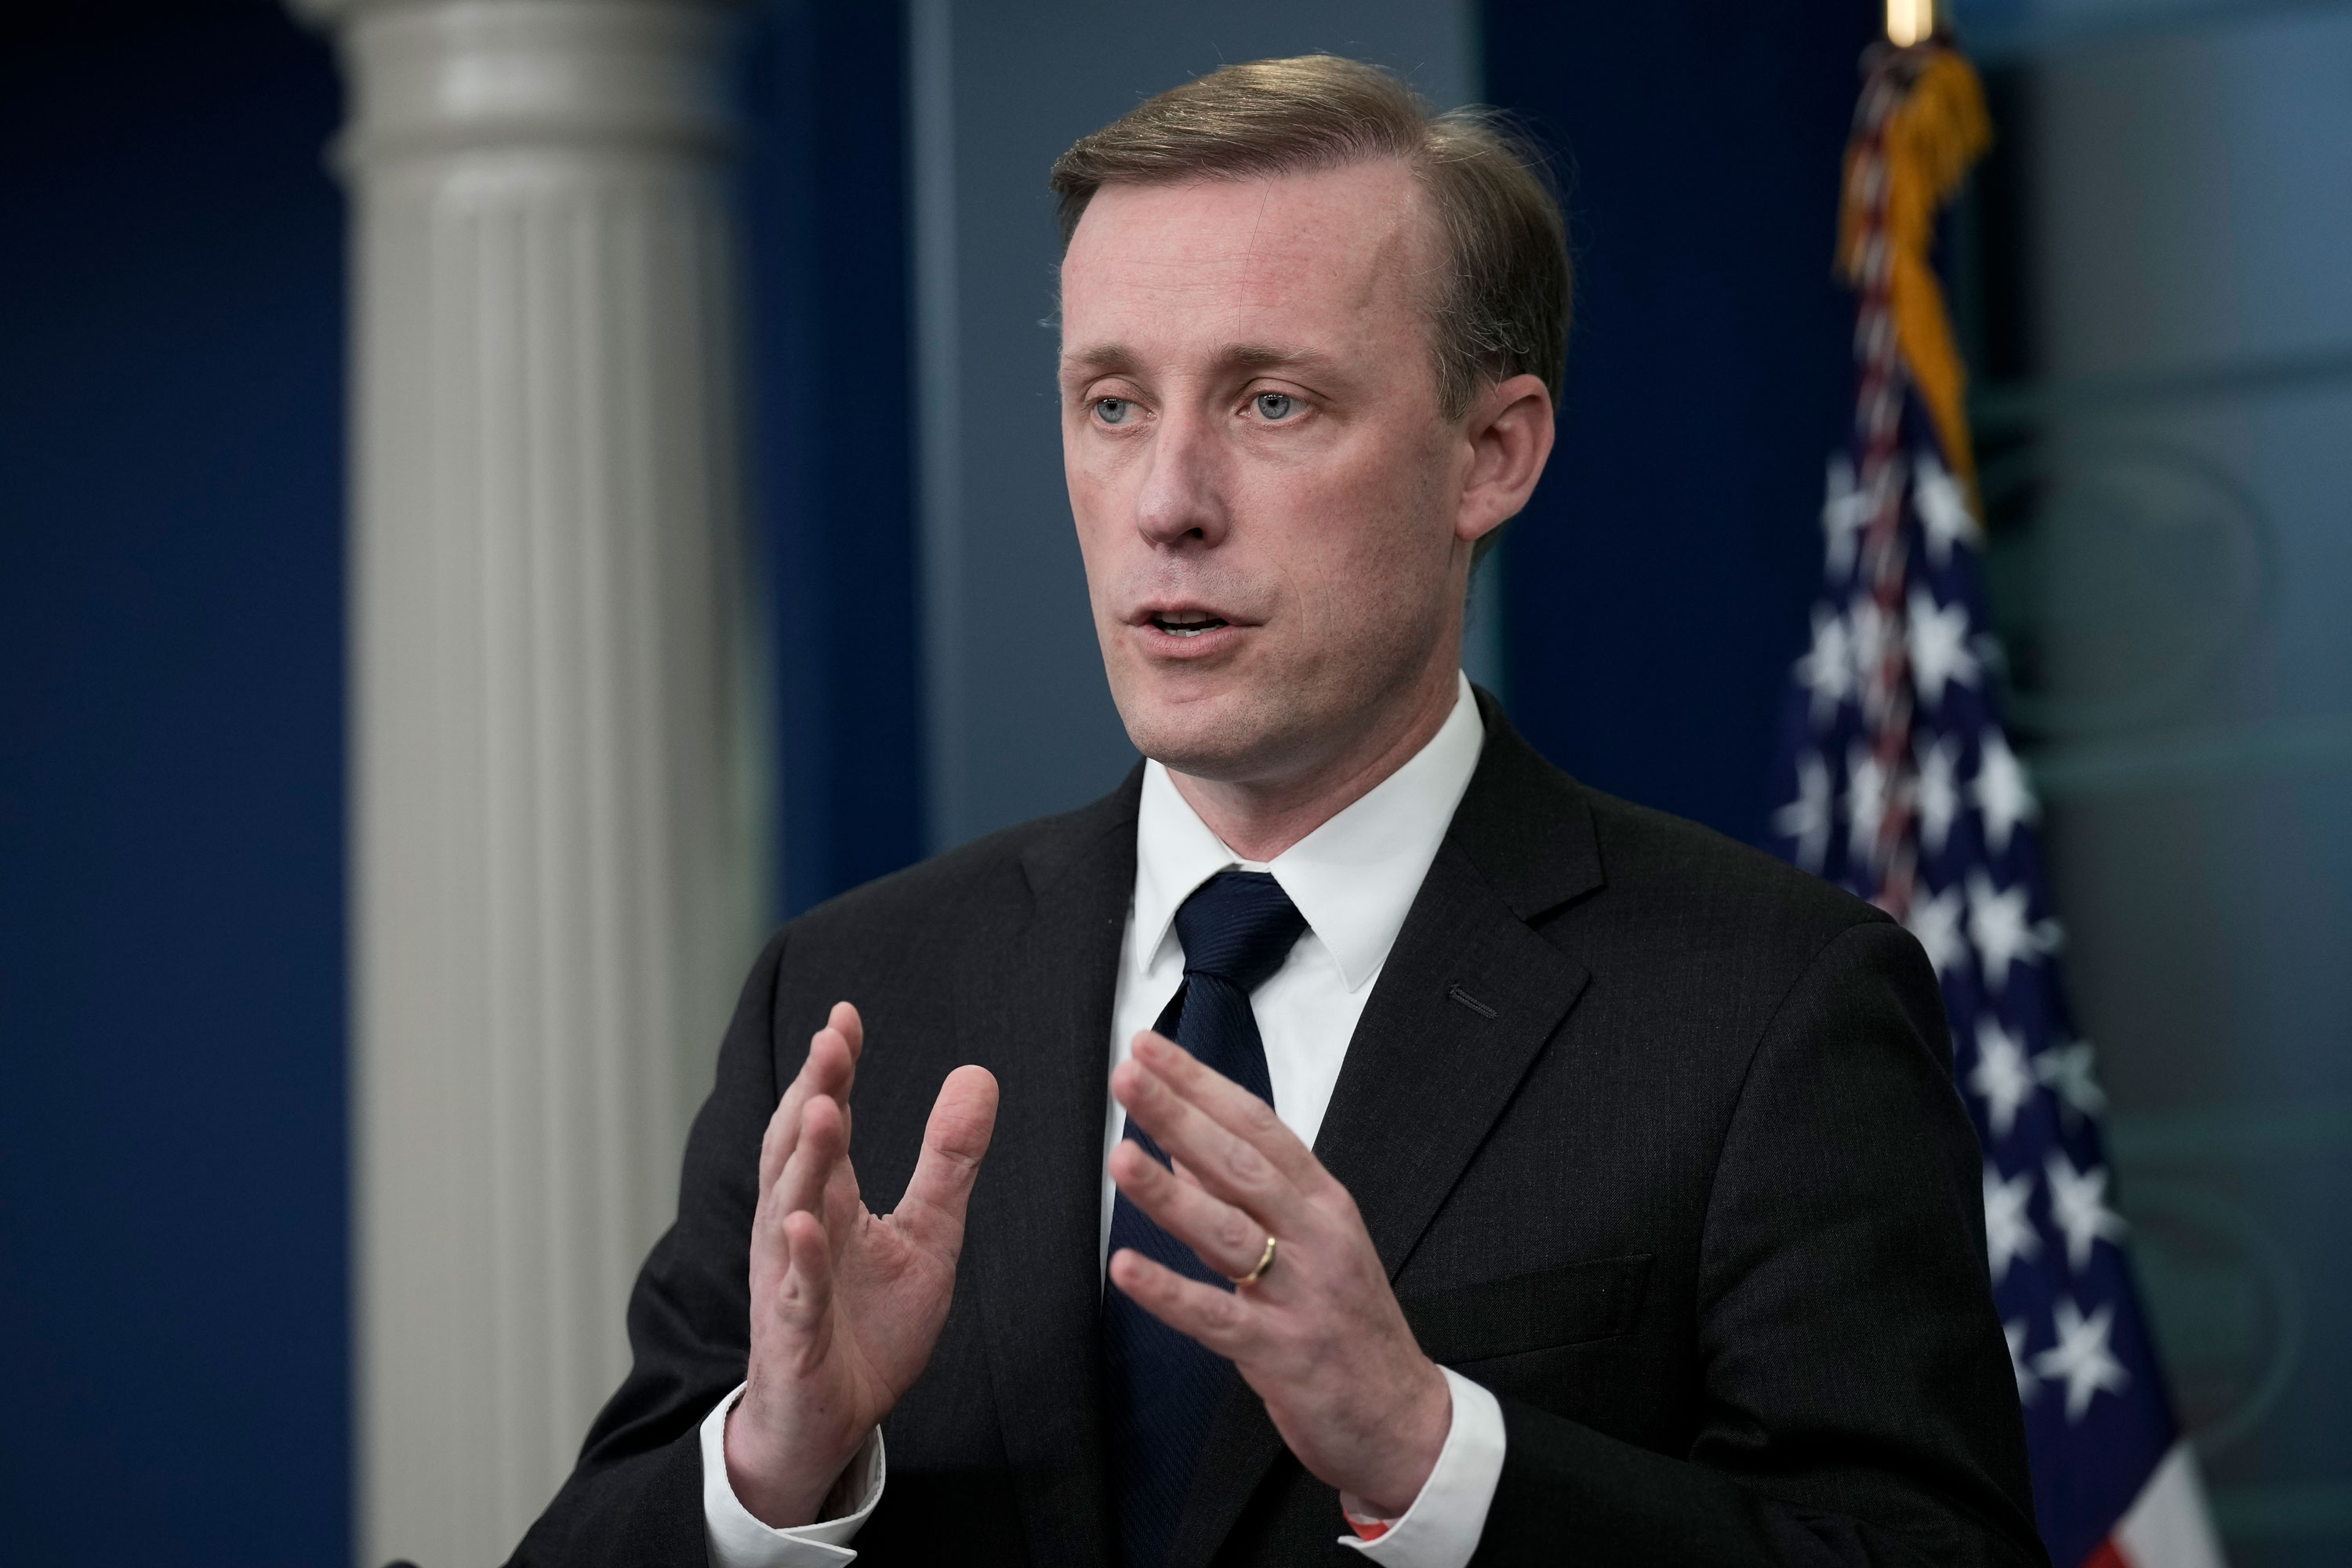 National Security Advisor Jake Sullivan speaks during the daily press briefing at the White House on December 12, 2022 in Washington, DC.